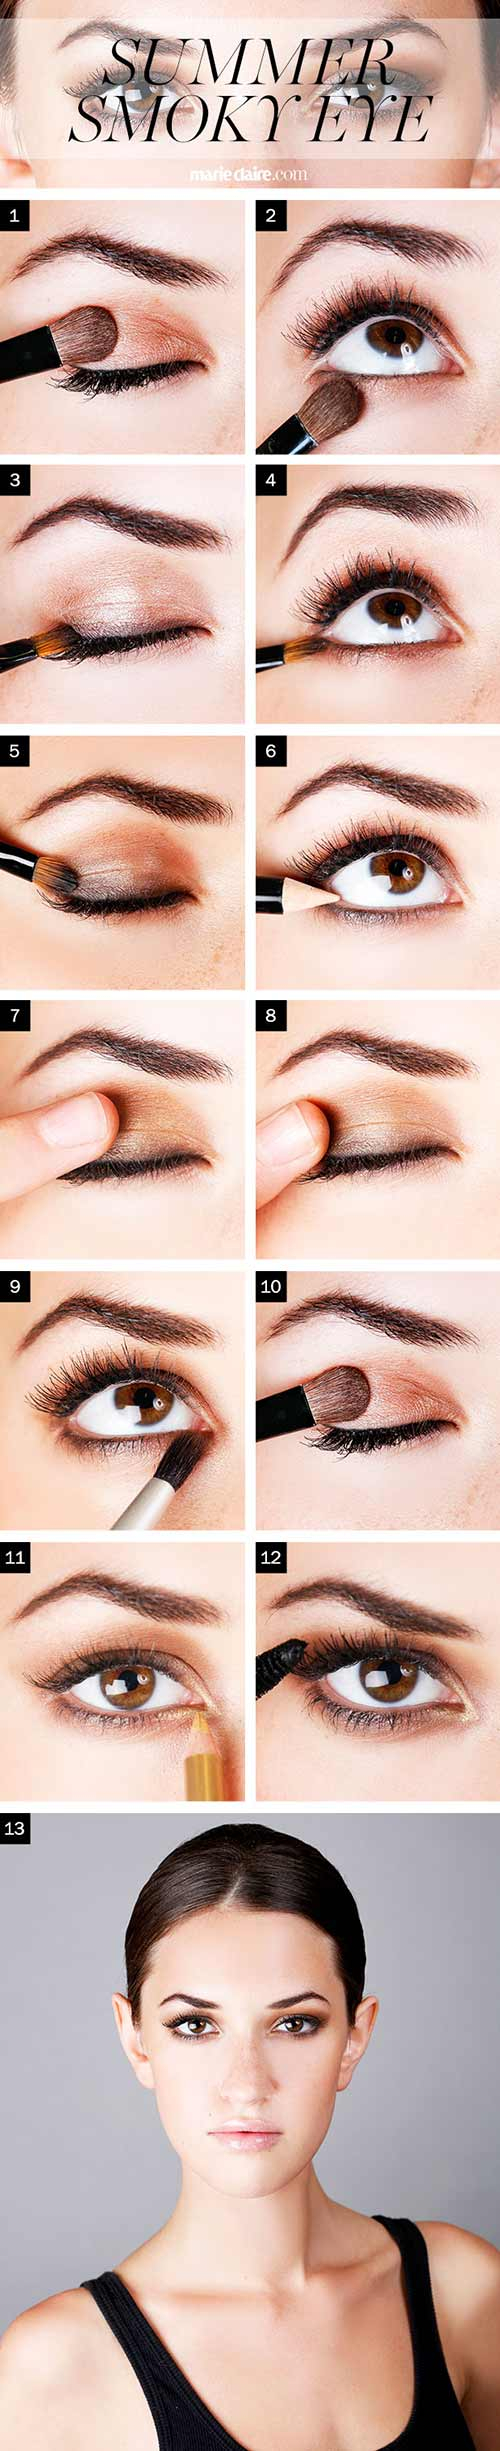 Eye Makeup For Light Brown Skin How To Do Smokey Eye Makeup Top 10 Tutorial Pictures For 2019